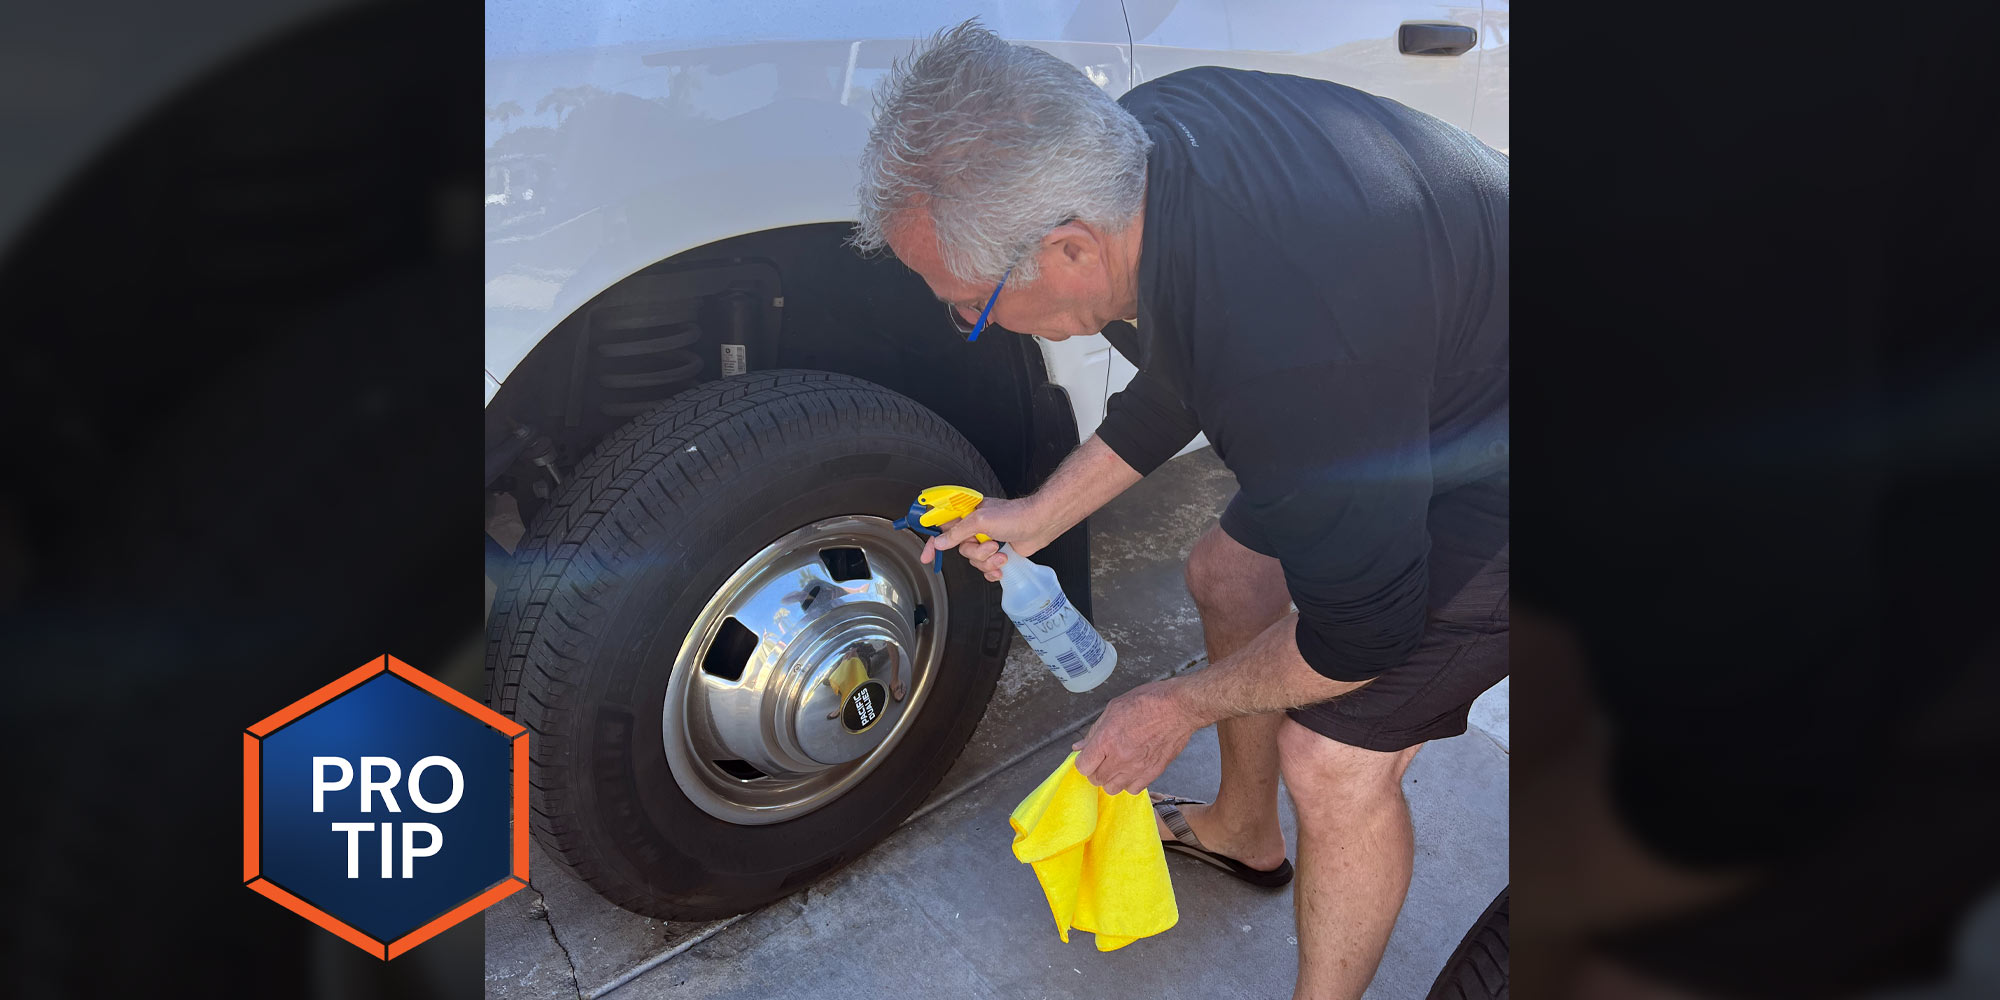 a man uses a spray bottle labeled VOOM on a tire rim